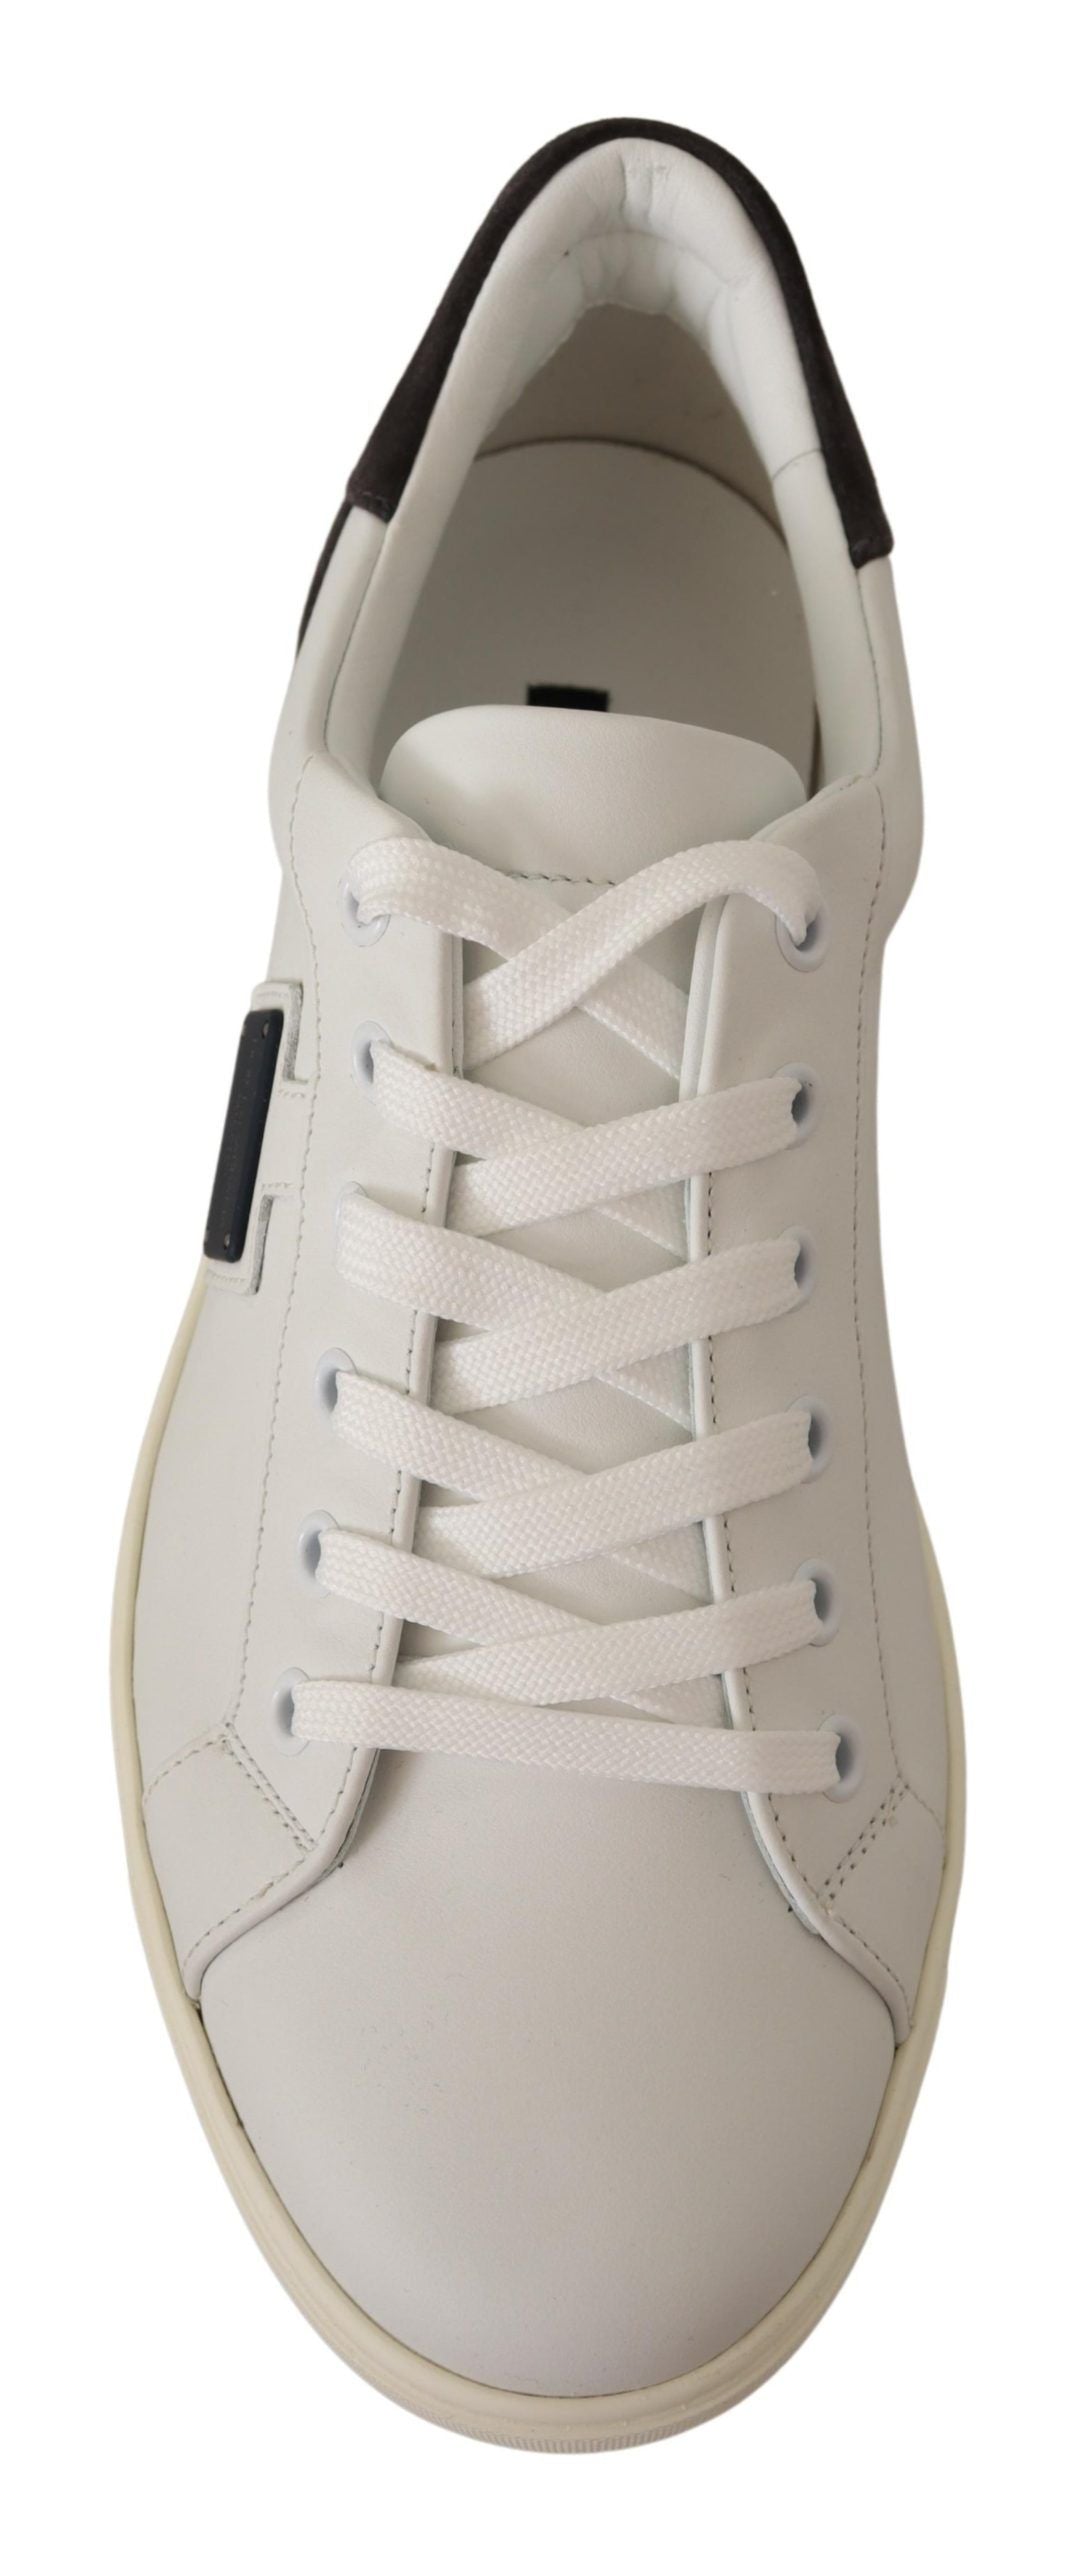 White Suede Leather Low Top Sneakers Shoes